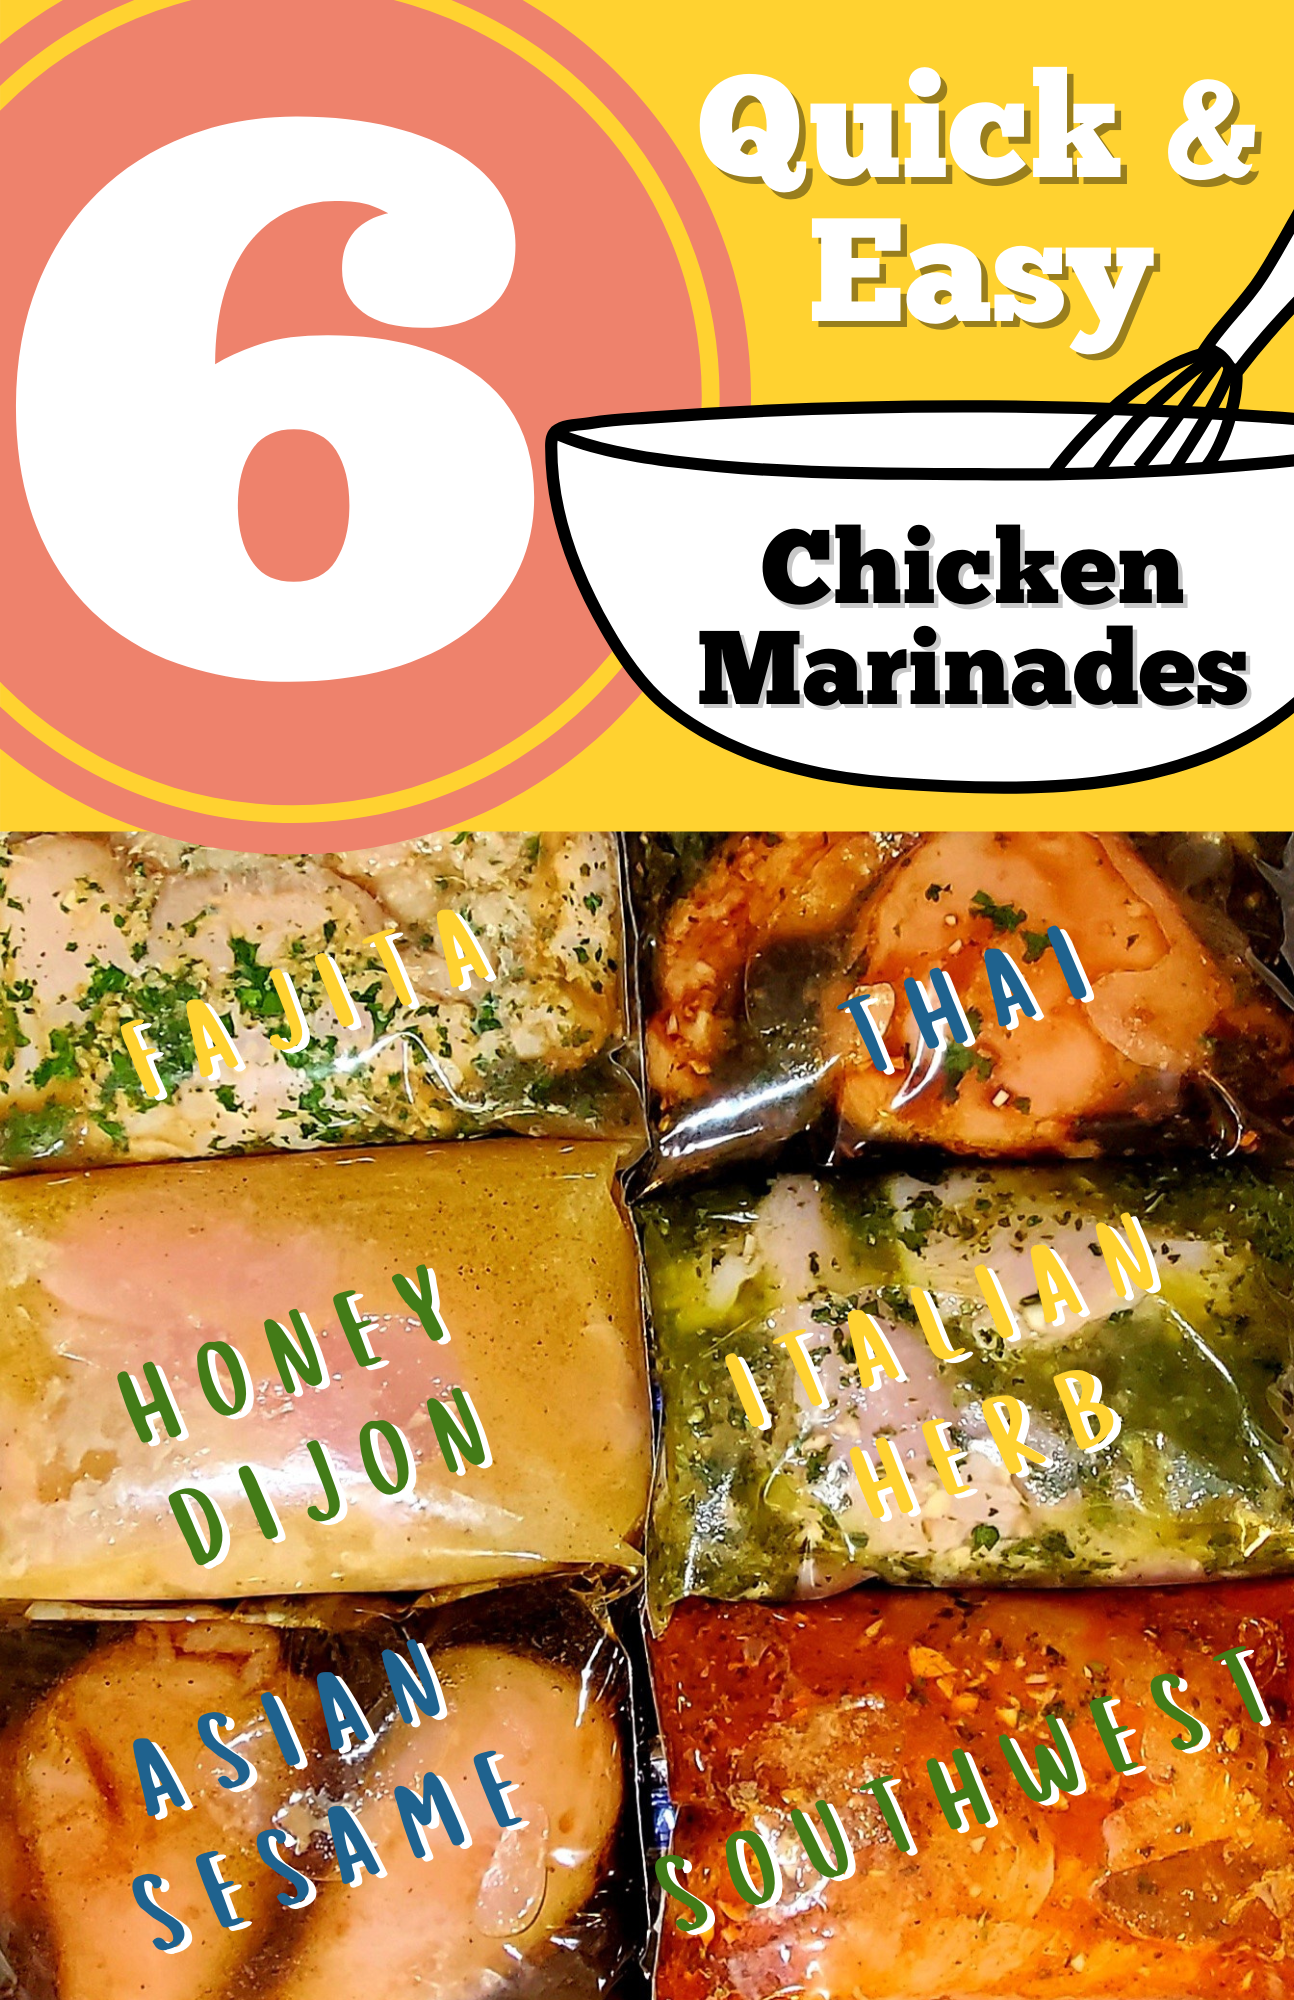 Chicken Marinades Web Page Image.png